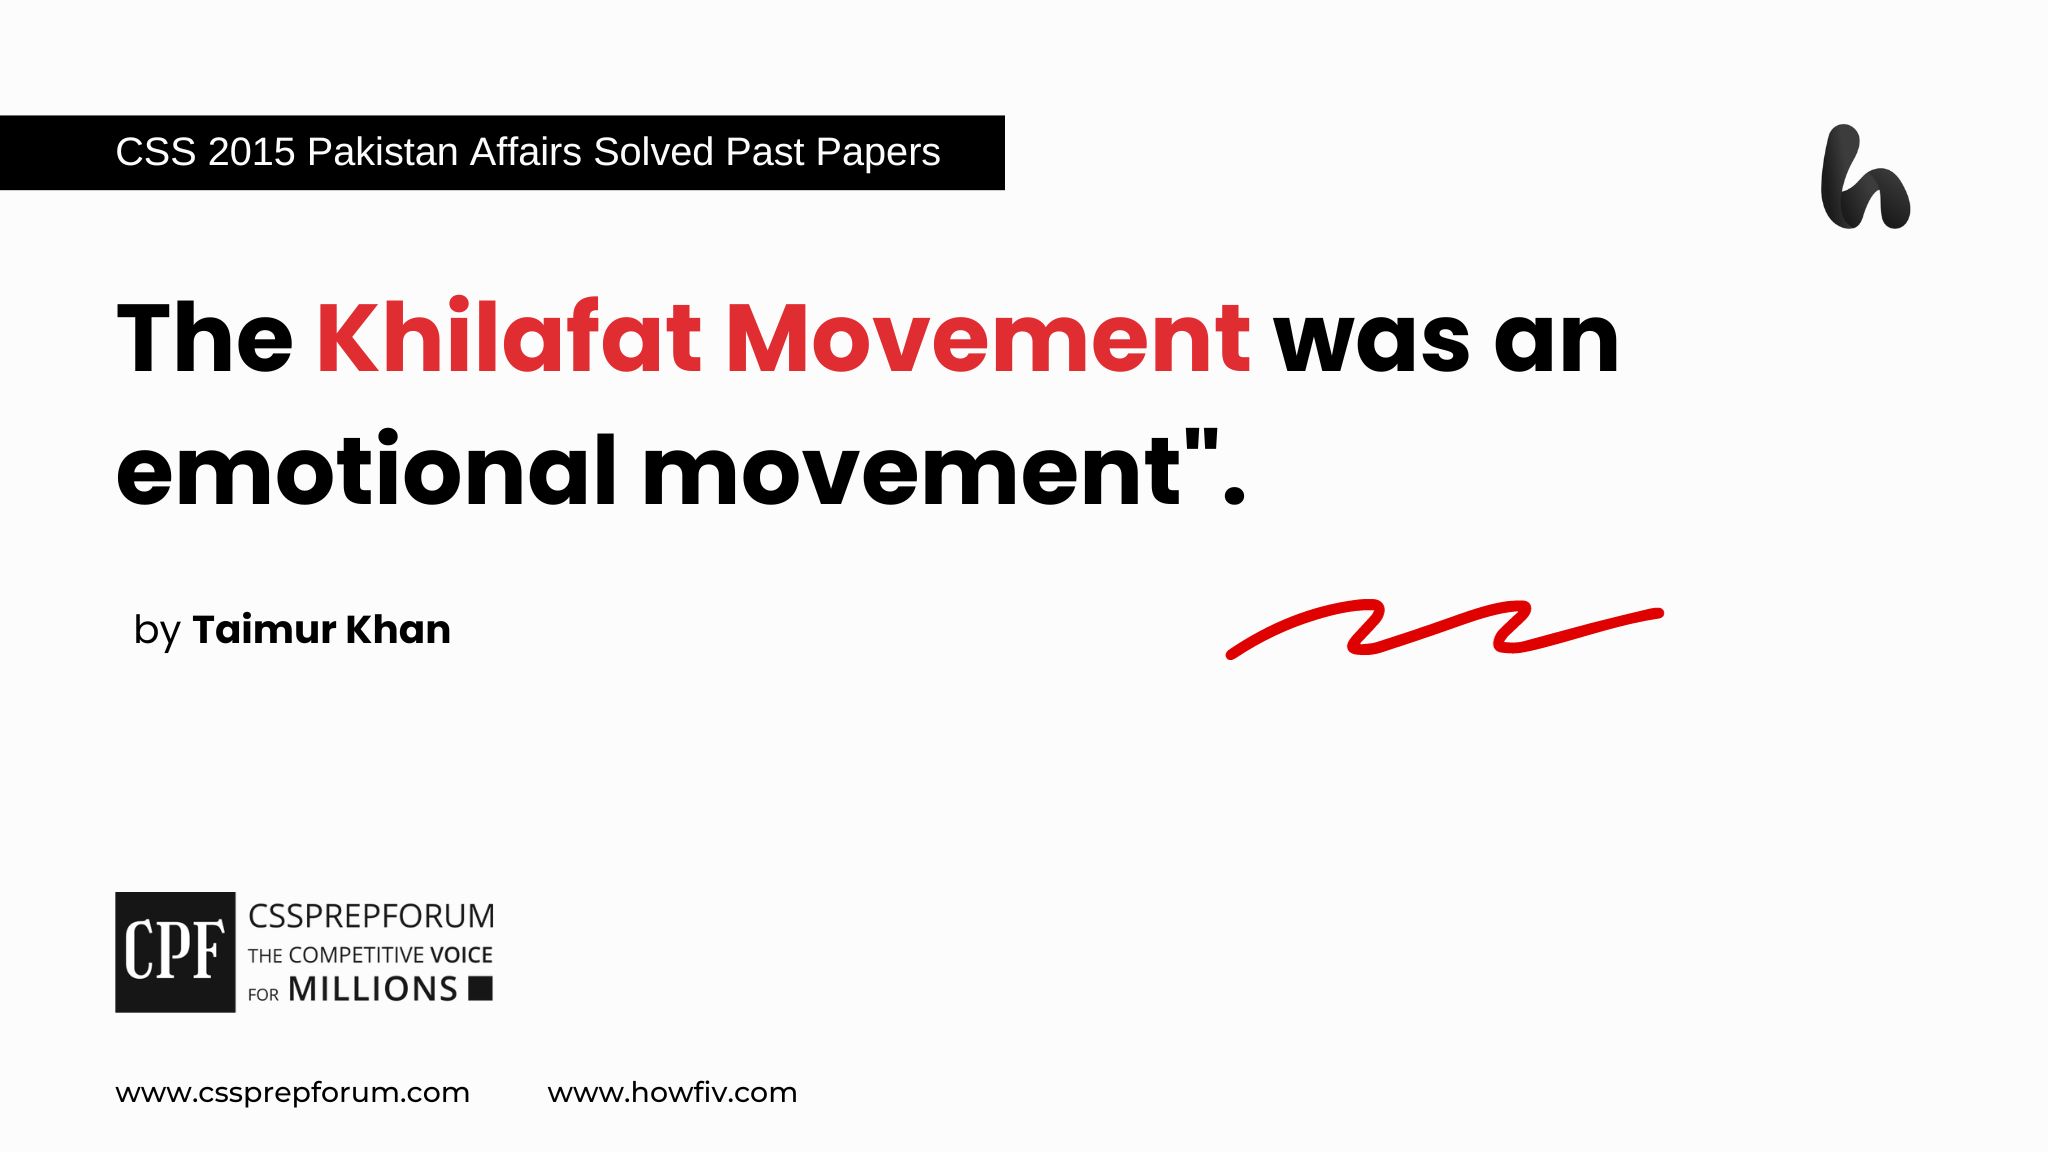 The Khilafat Movement was an emotional movement.